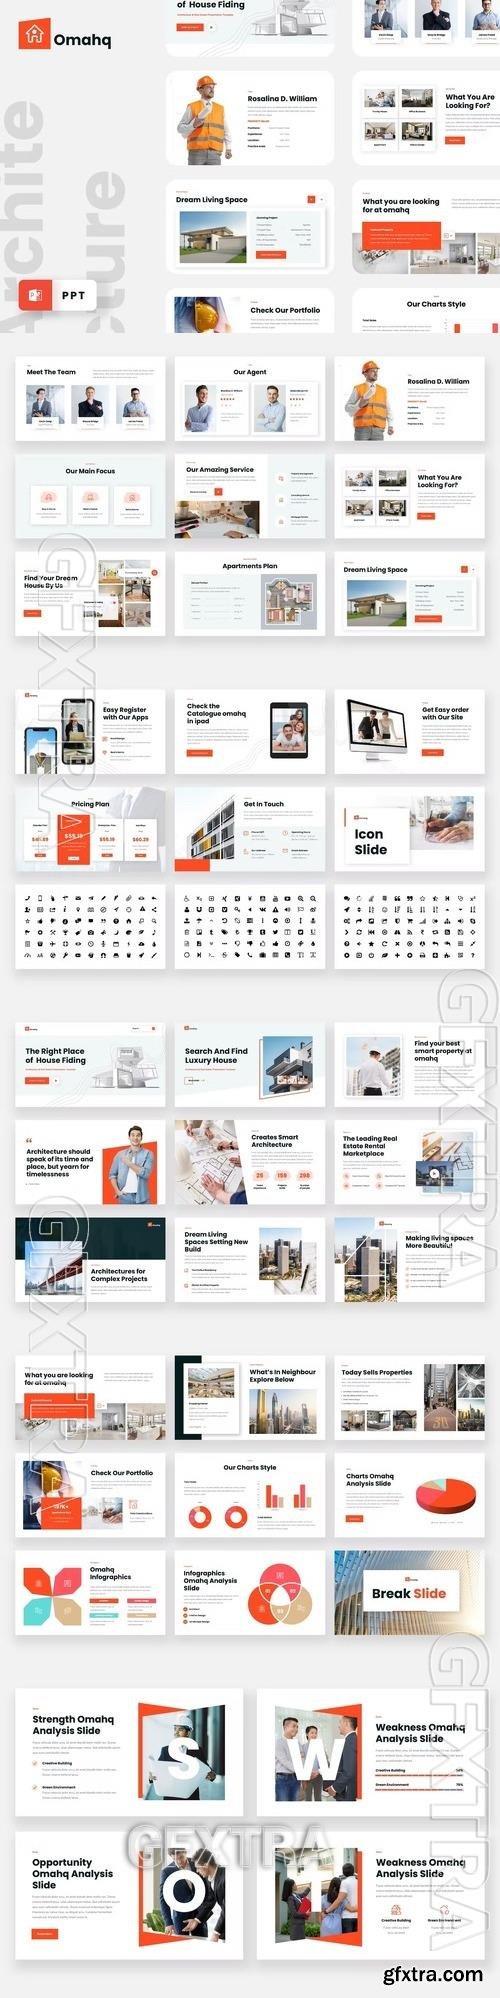 Omahq - Architecture Powerpoint Template R8M6GMC